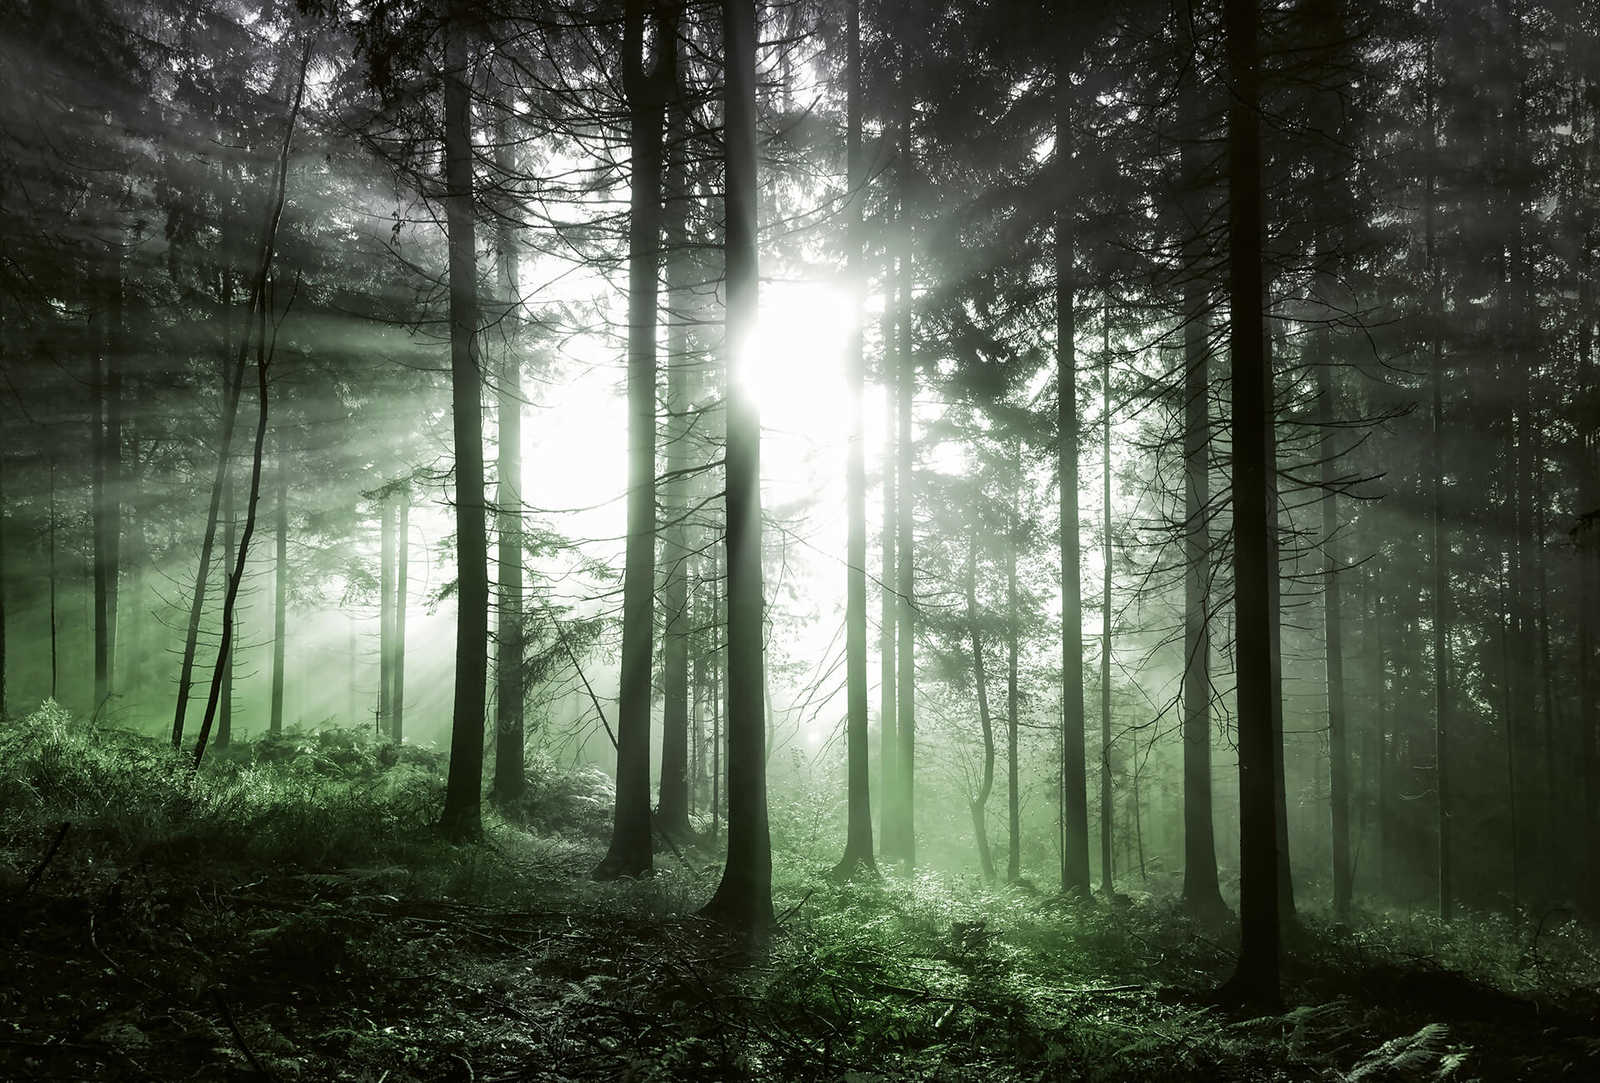         Photo wallpaper forest with light incidence - green, black, white
    